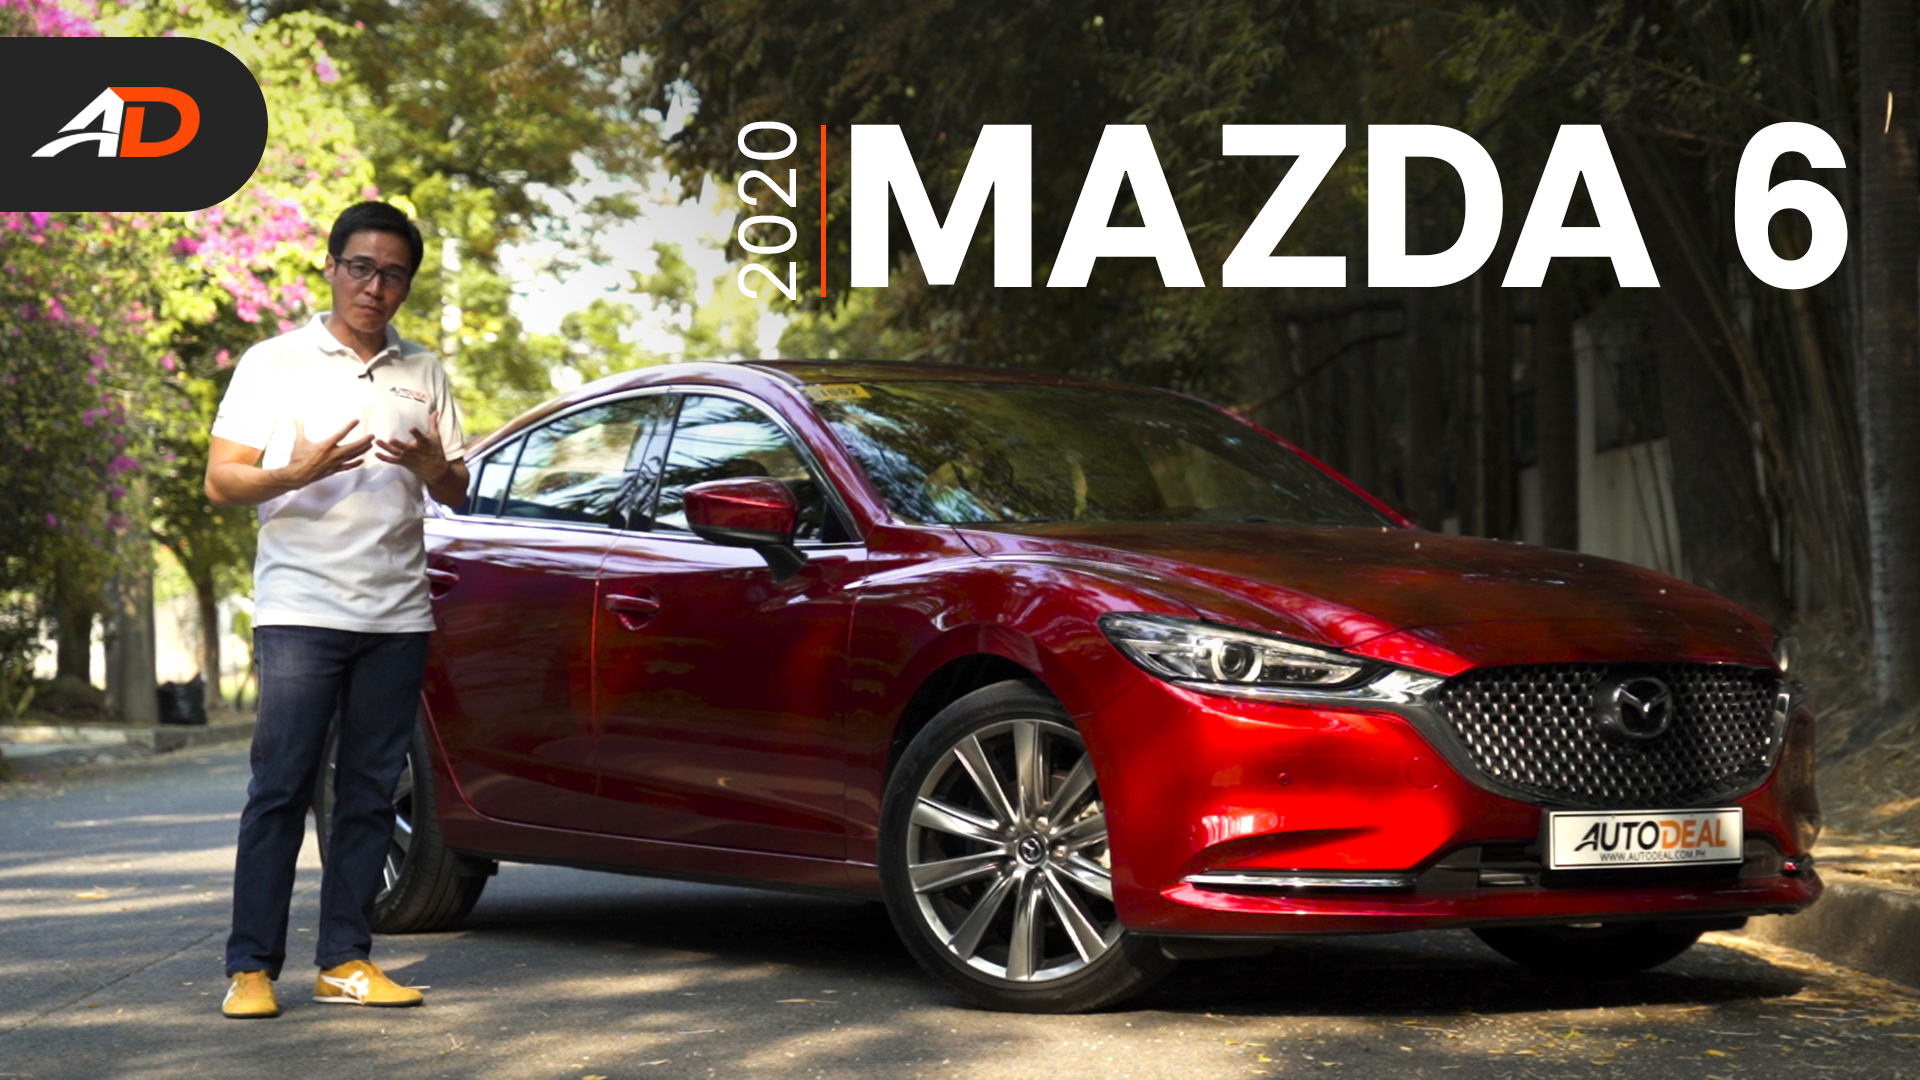 2020 Mazda6 Review - Behind the Wheel | Autodeal